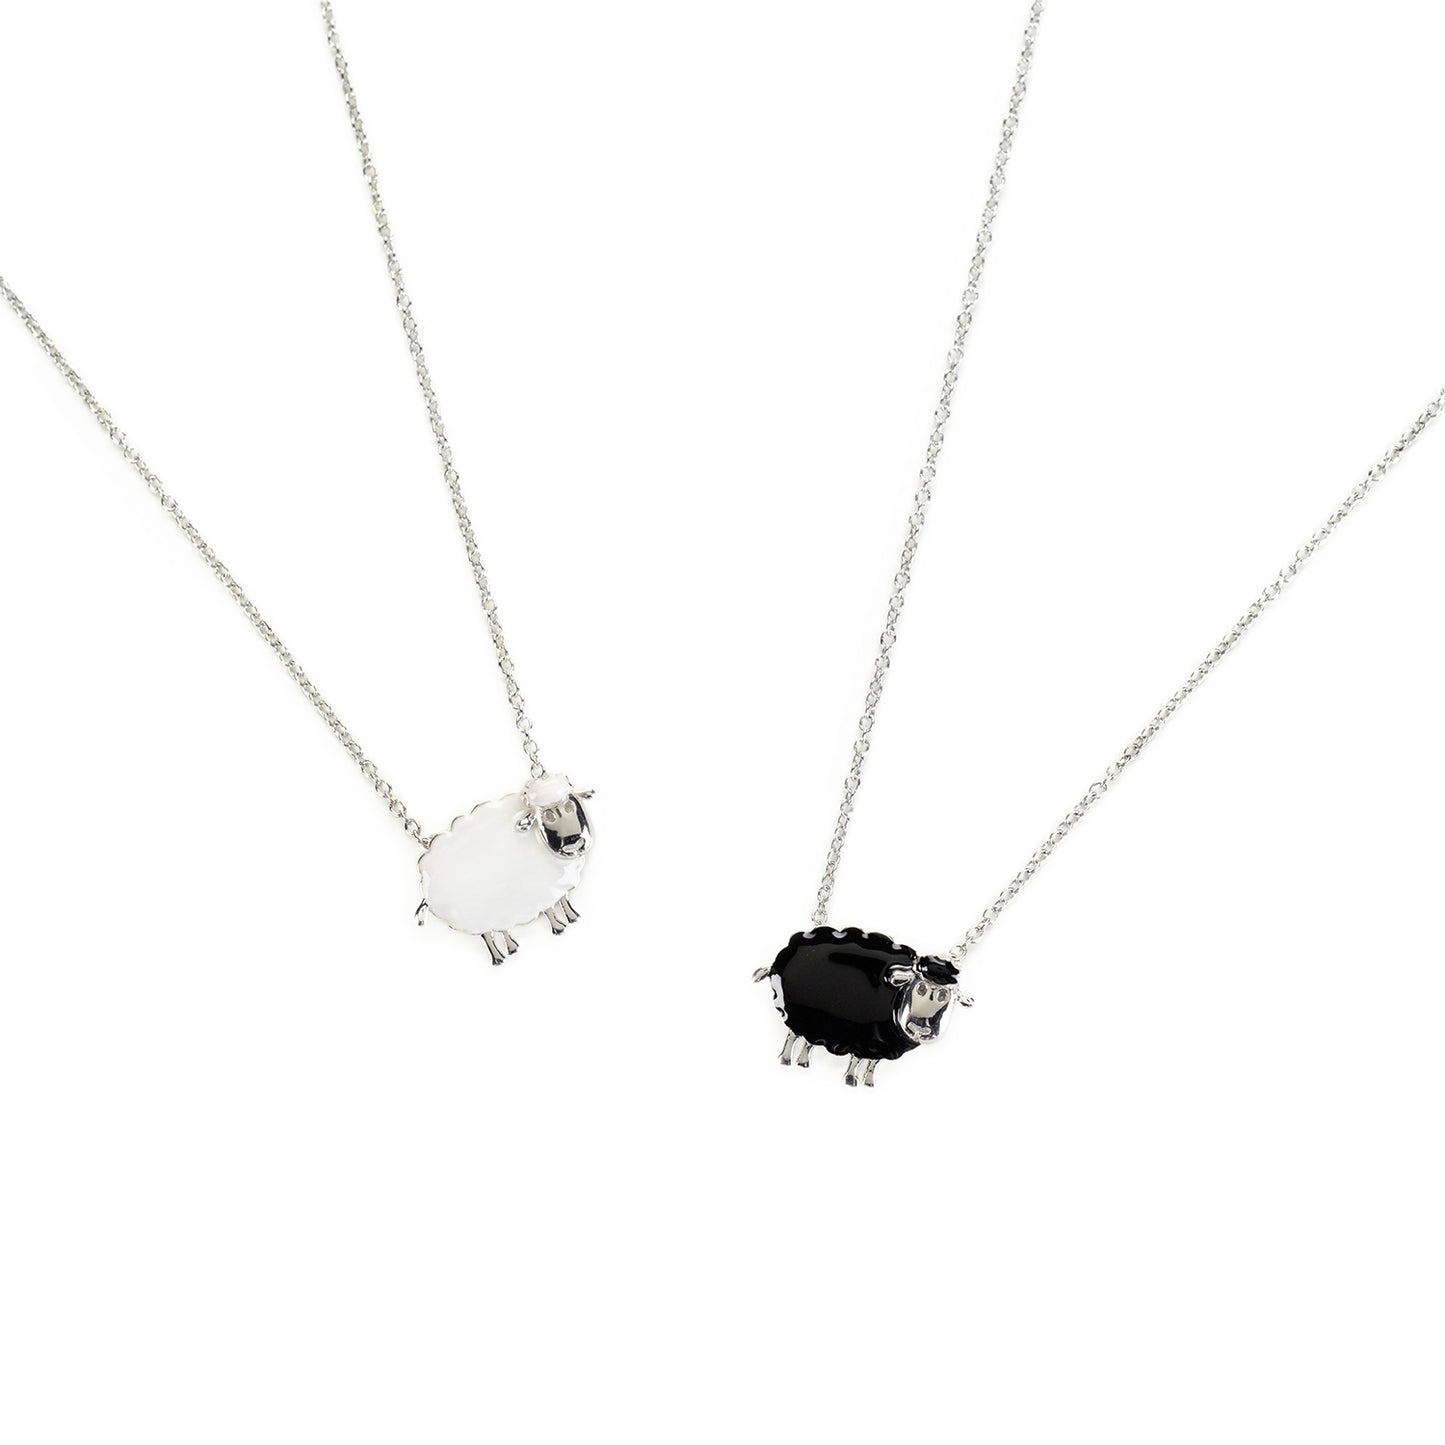 Black sheep necklace in silver and enamel